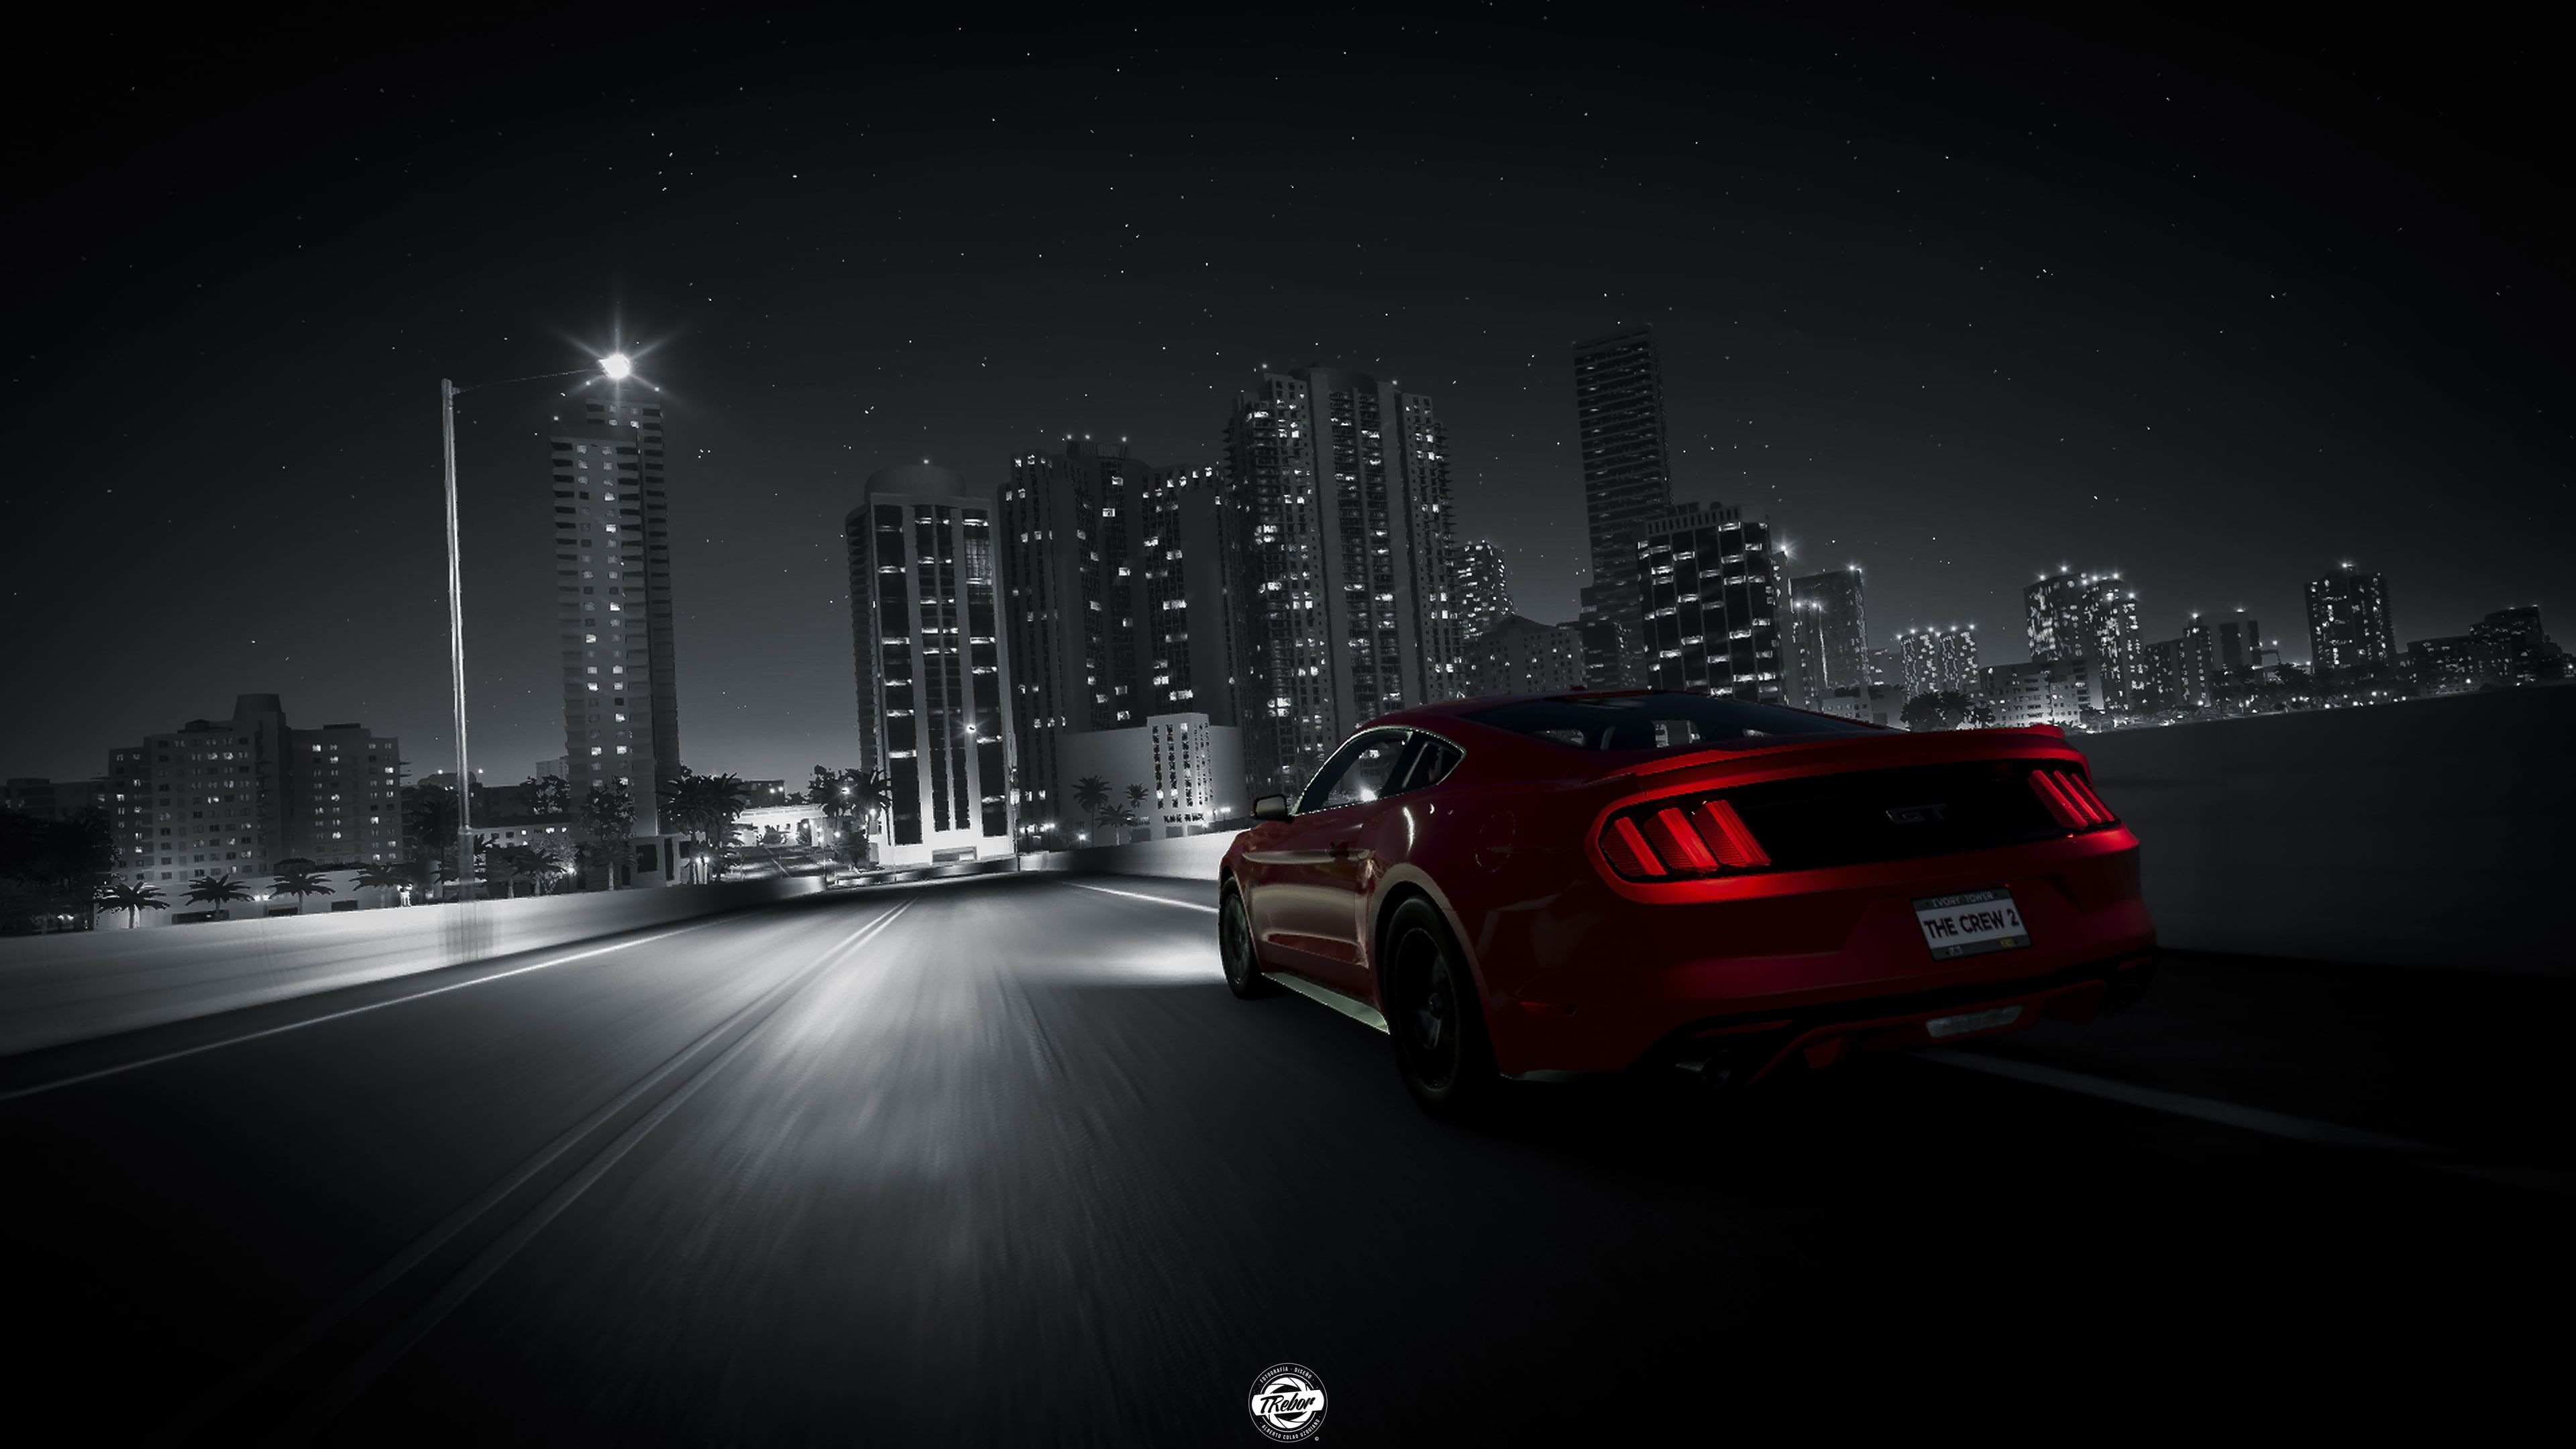 the crew 2 the crew #games pc games xbox games ps games k #hd ford mustang K #wallpaper #hdwallpaper #desk. Ford mustang wallpaper, Mustang wallpaper, Mustang